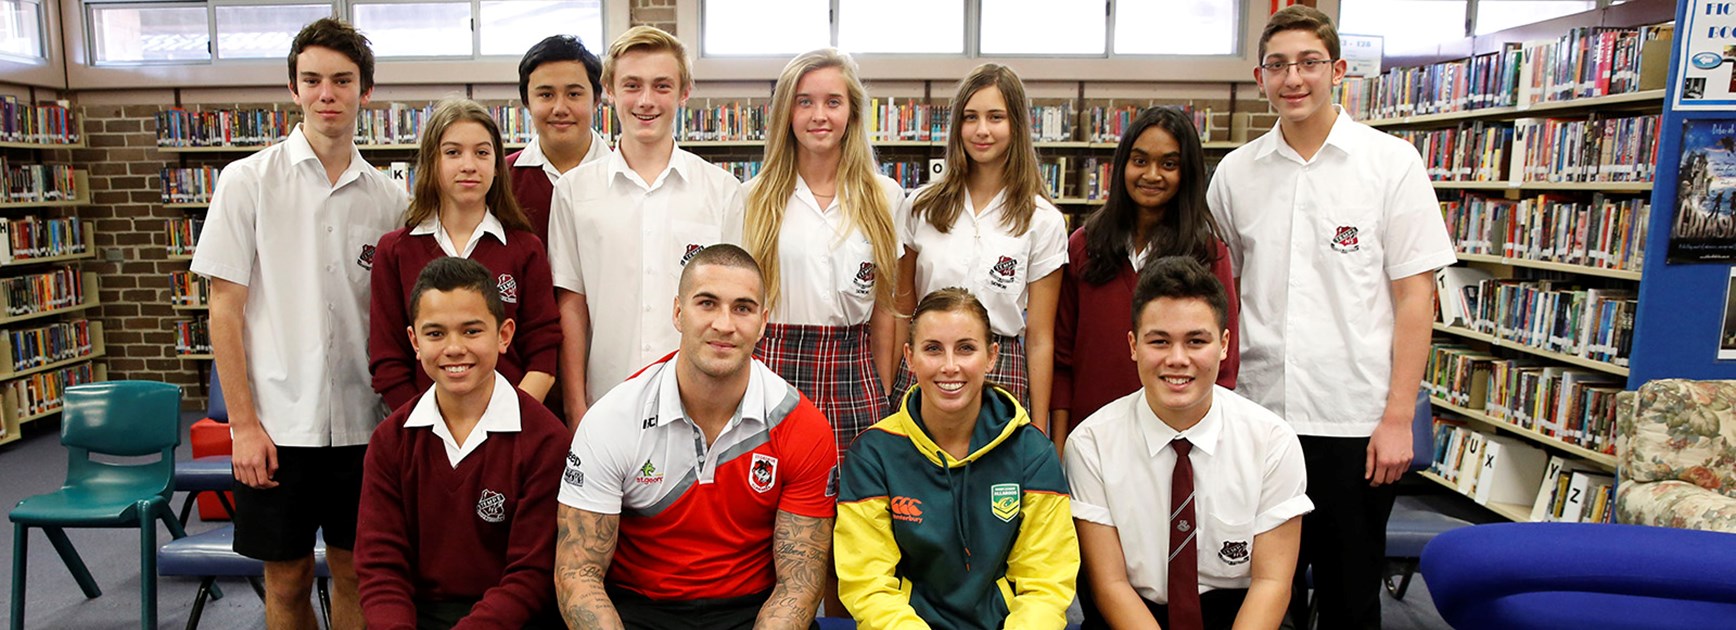 Joel Thompson and Samantha Hammond with students from Tempe High School at the Dream Believe Achieve launch.